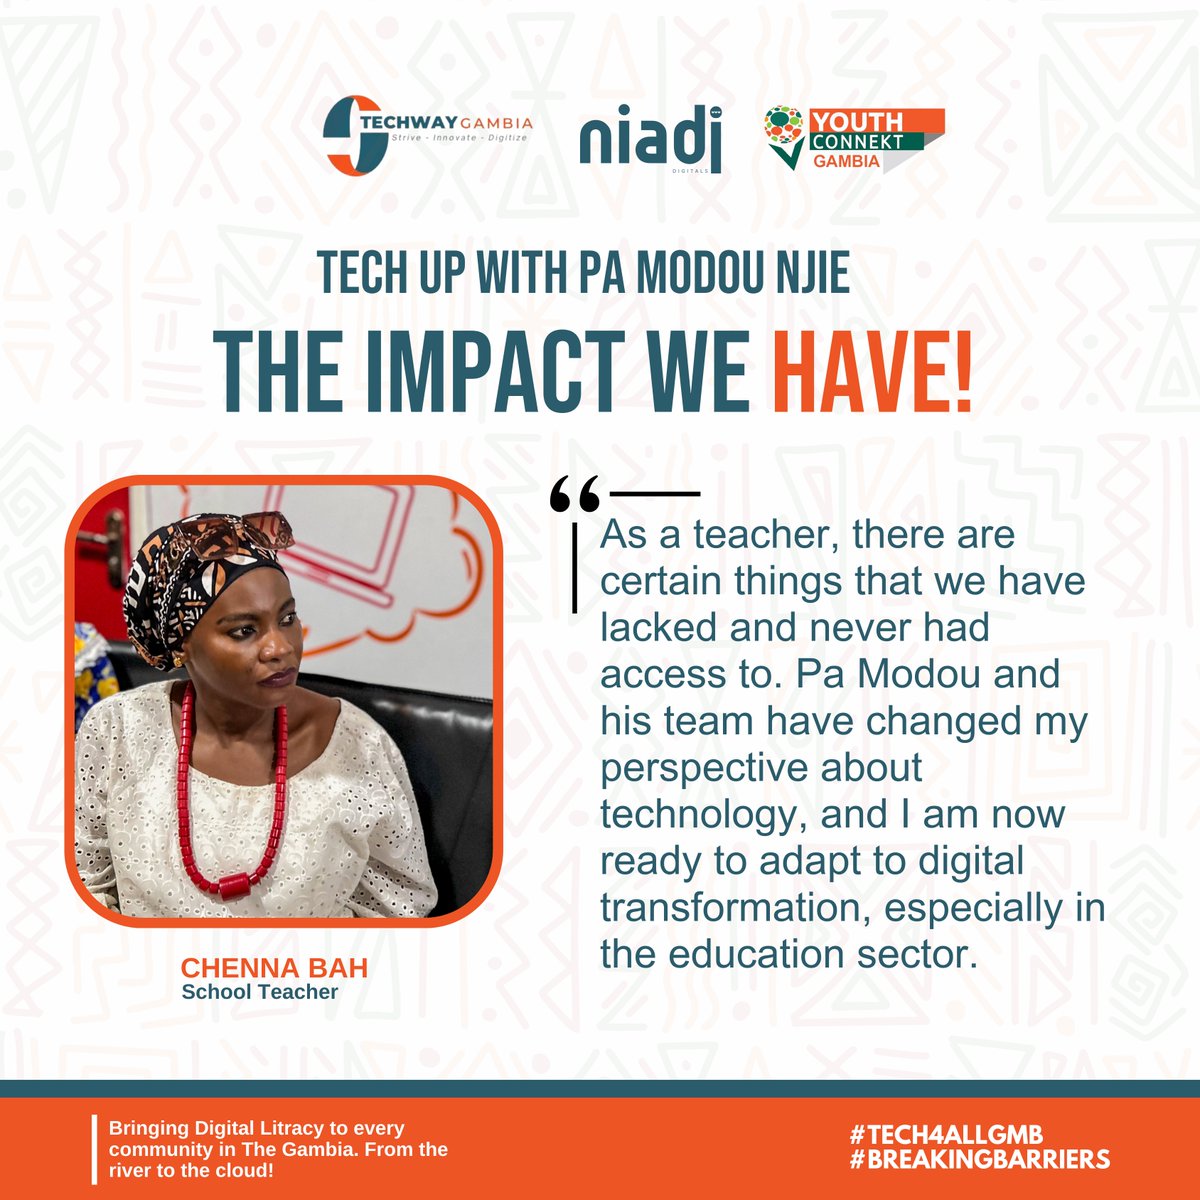 As a trainer, there's nothing more rewarding than seeing teachers like Mrs. Chenna Bah embrace digital transformation! I am thrilled to equip educators with the skills to revolutionize learning in The Gambia's classrooms.

#DigitalLearning #TheFutureIsNow